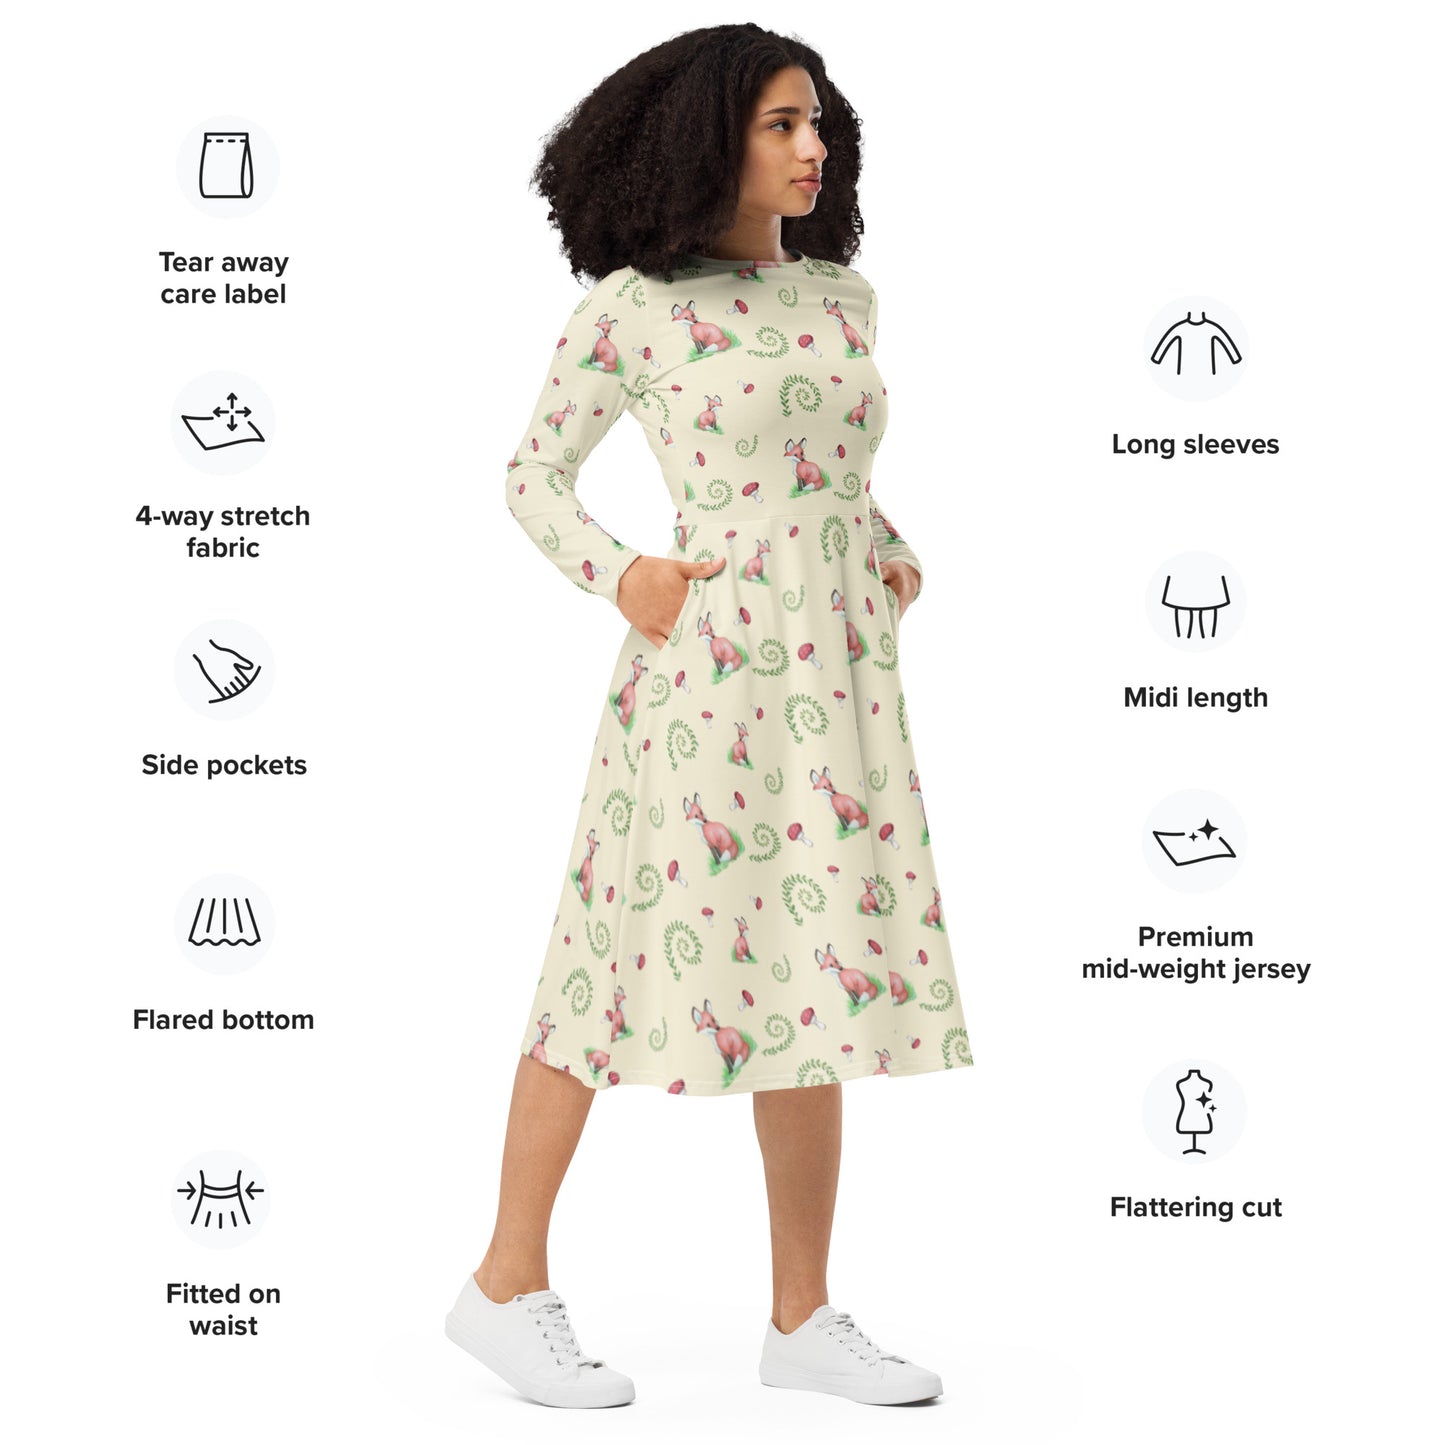 Fox pattern long sleeve midi dress with side pockets, fitted waist, and flared bottom. Foxes, ferns, and mushrooms are patterned on the apricot white fabric. Soft and comfortable. Shown on female model facing right.